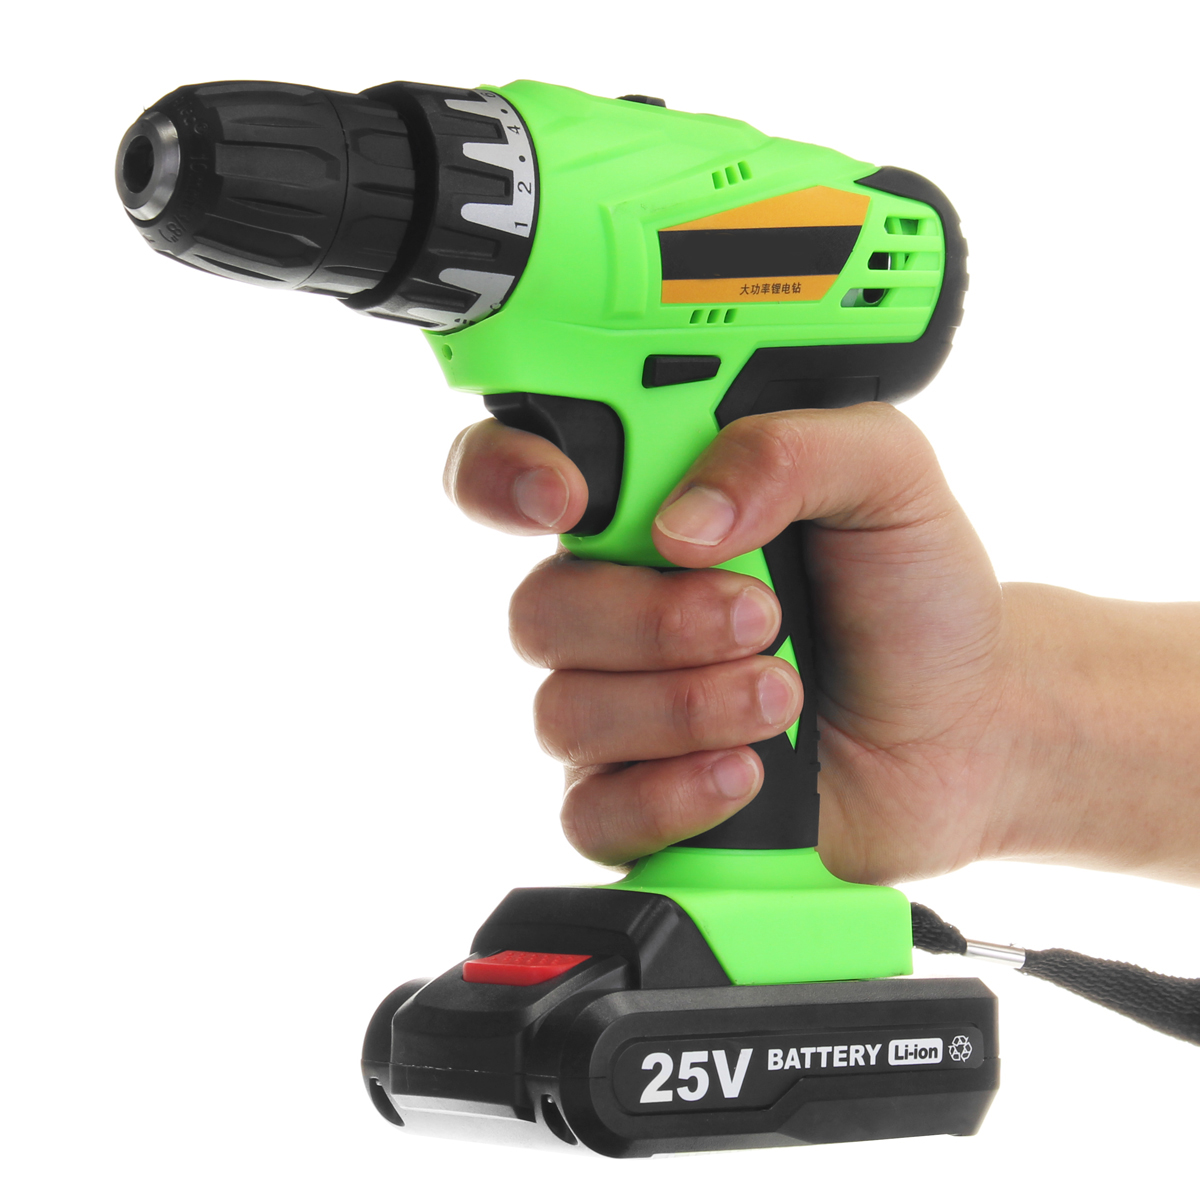 25V-Cordless-Power-Drill-2-Lithium-Ion-Battery-Rechargeable-Electric-Screwdriver-Kit-1275028-5